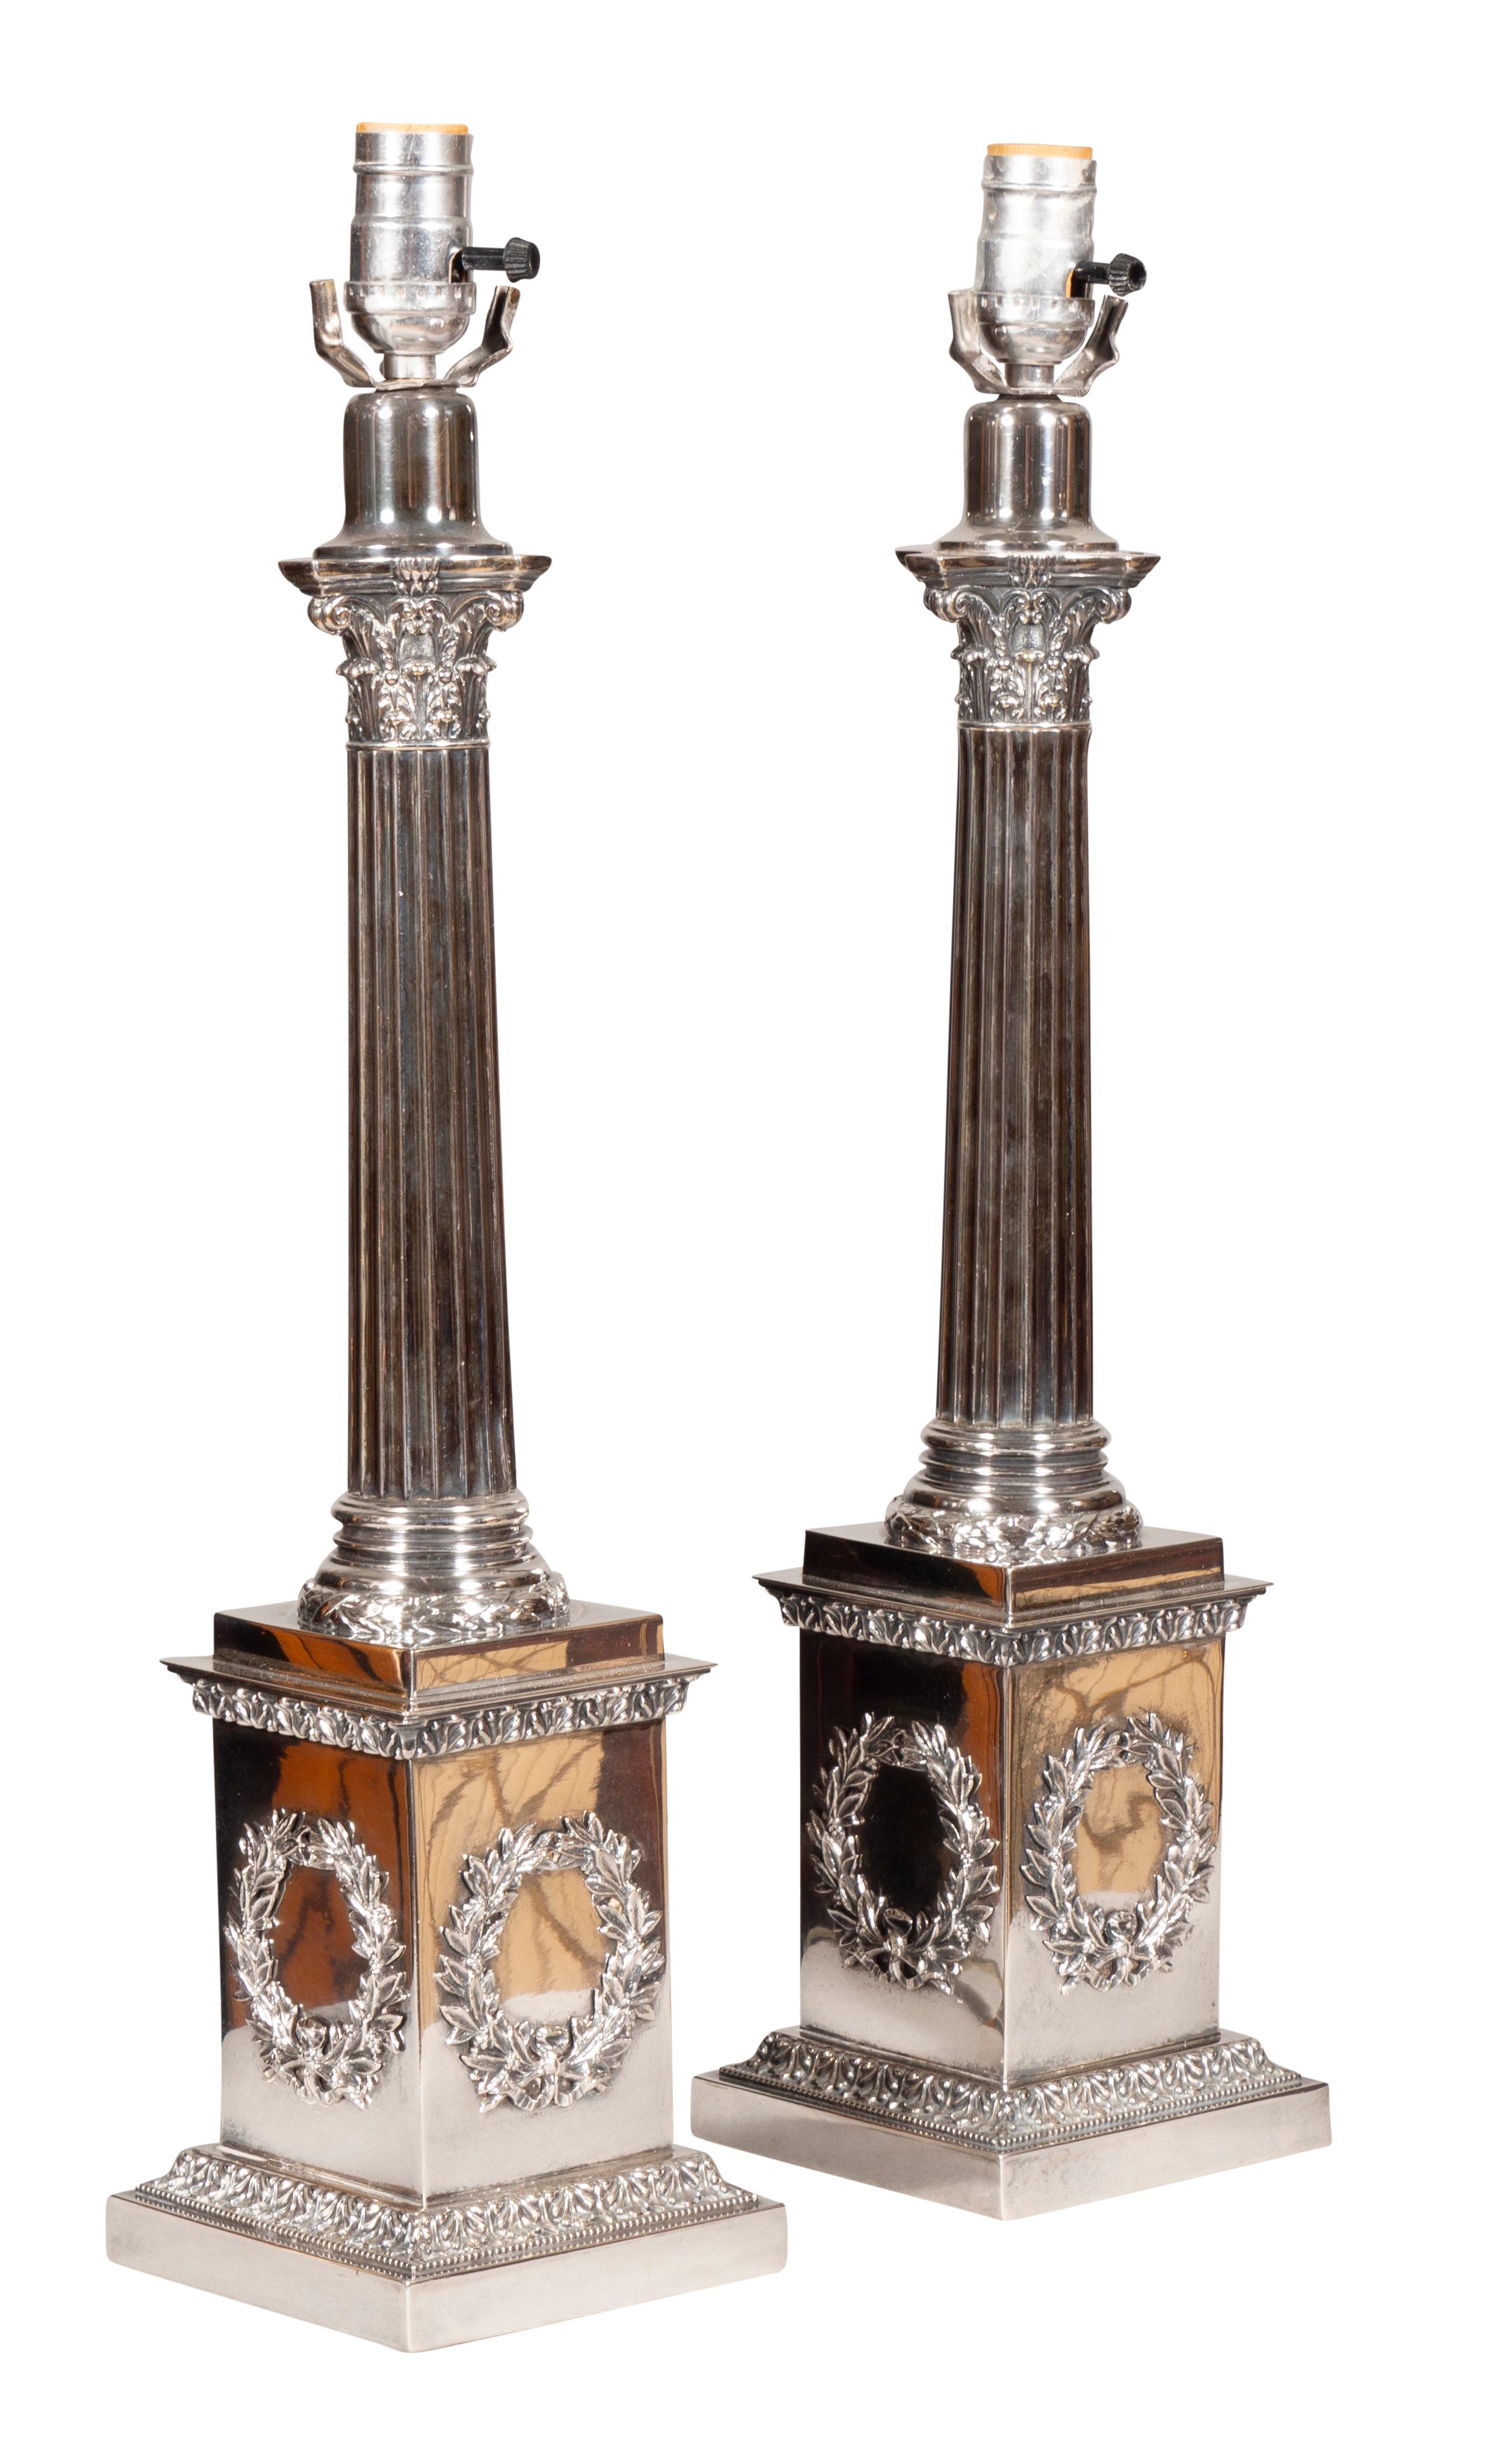 Regency Revival Pair Of Edwardian Silver Plated Table Lamps